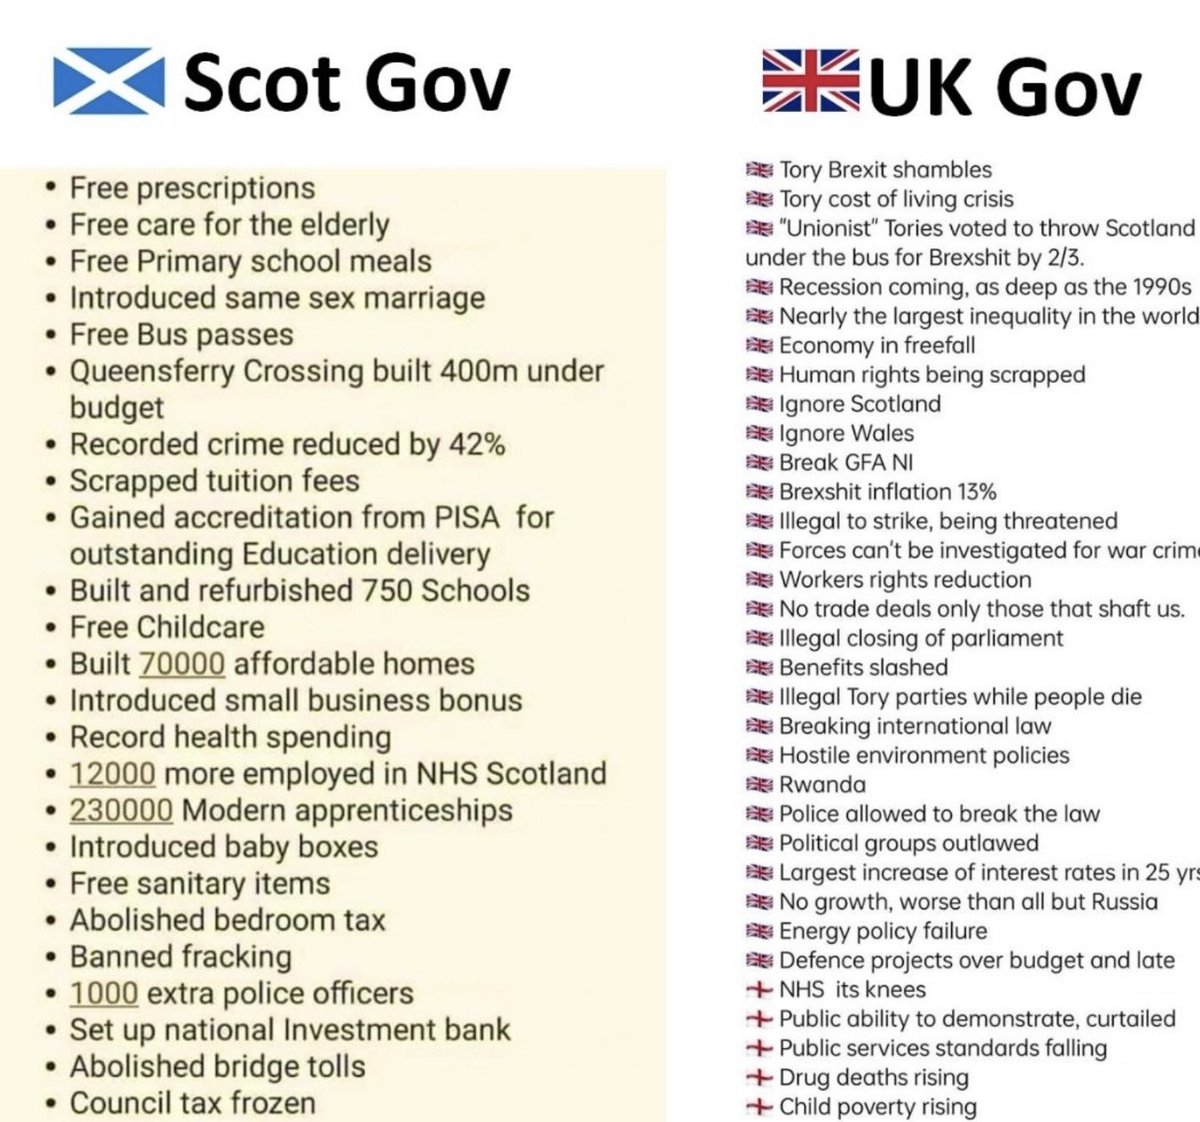 This is what ⁦@theSNP⁩ have done for 🏴󠁧󠁢󠁳󠁣󠁴󠁿 compared to the 🇬🇧! Can you imagine what could be possible with full Independence! Vote ⁦@theSNP⁩ is the only way 🏴󠁧󠁢󠁳󠁣󠁴󠁿 can break away from this Unequal Union #ScottishIndependenceASAP🏴󠁧󠁢󠁳󠁣󠁴󠁿!